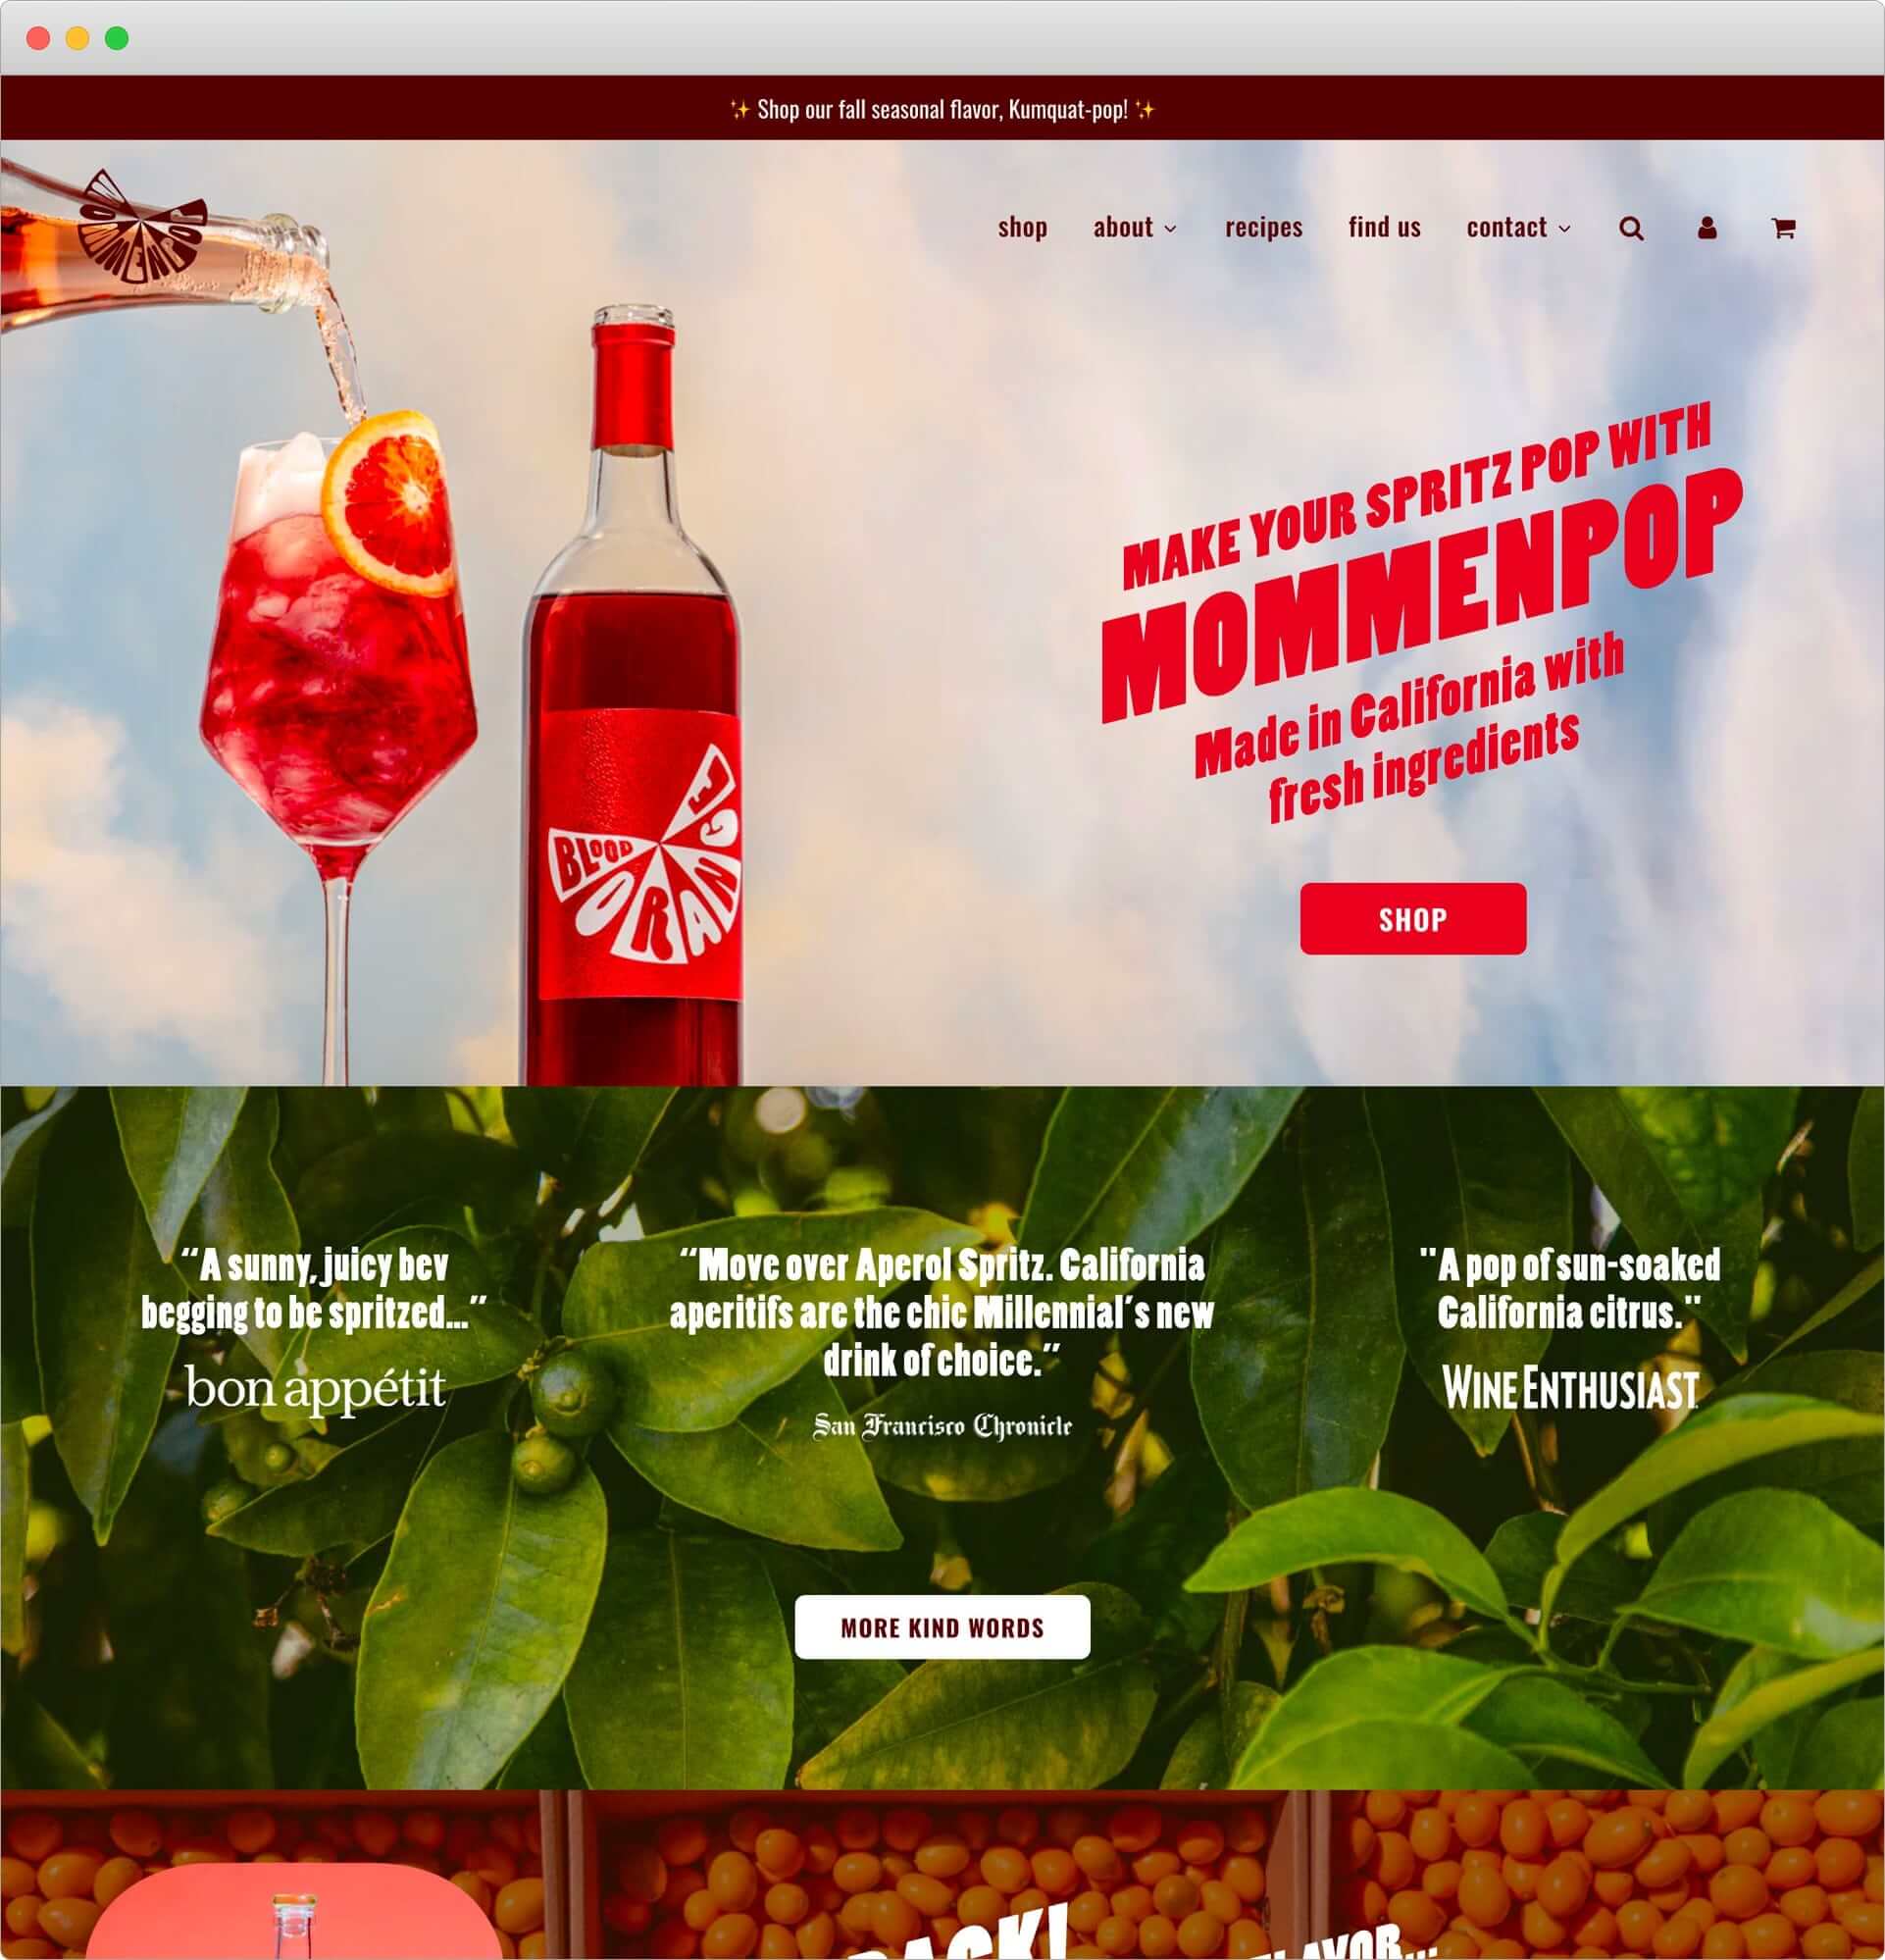 A screenshot of the Mommenpop website home page